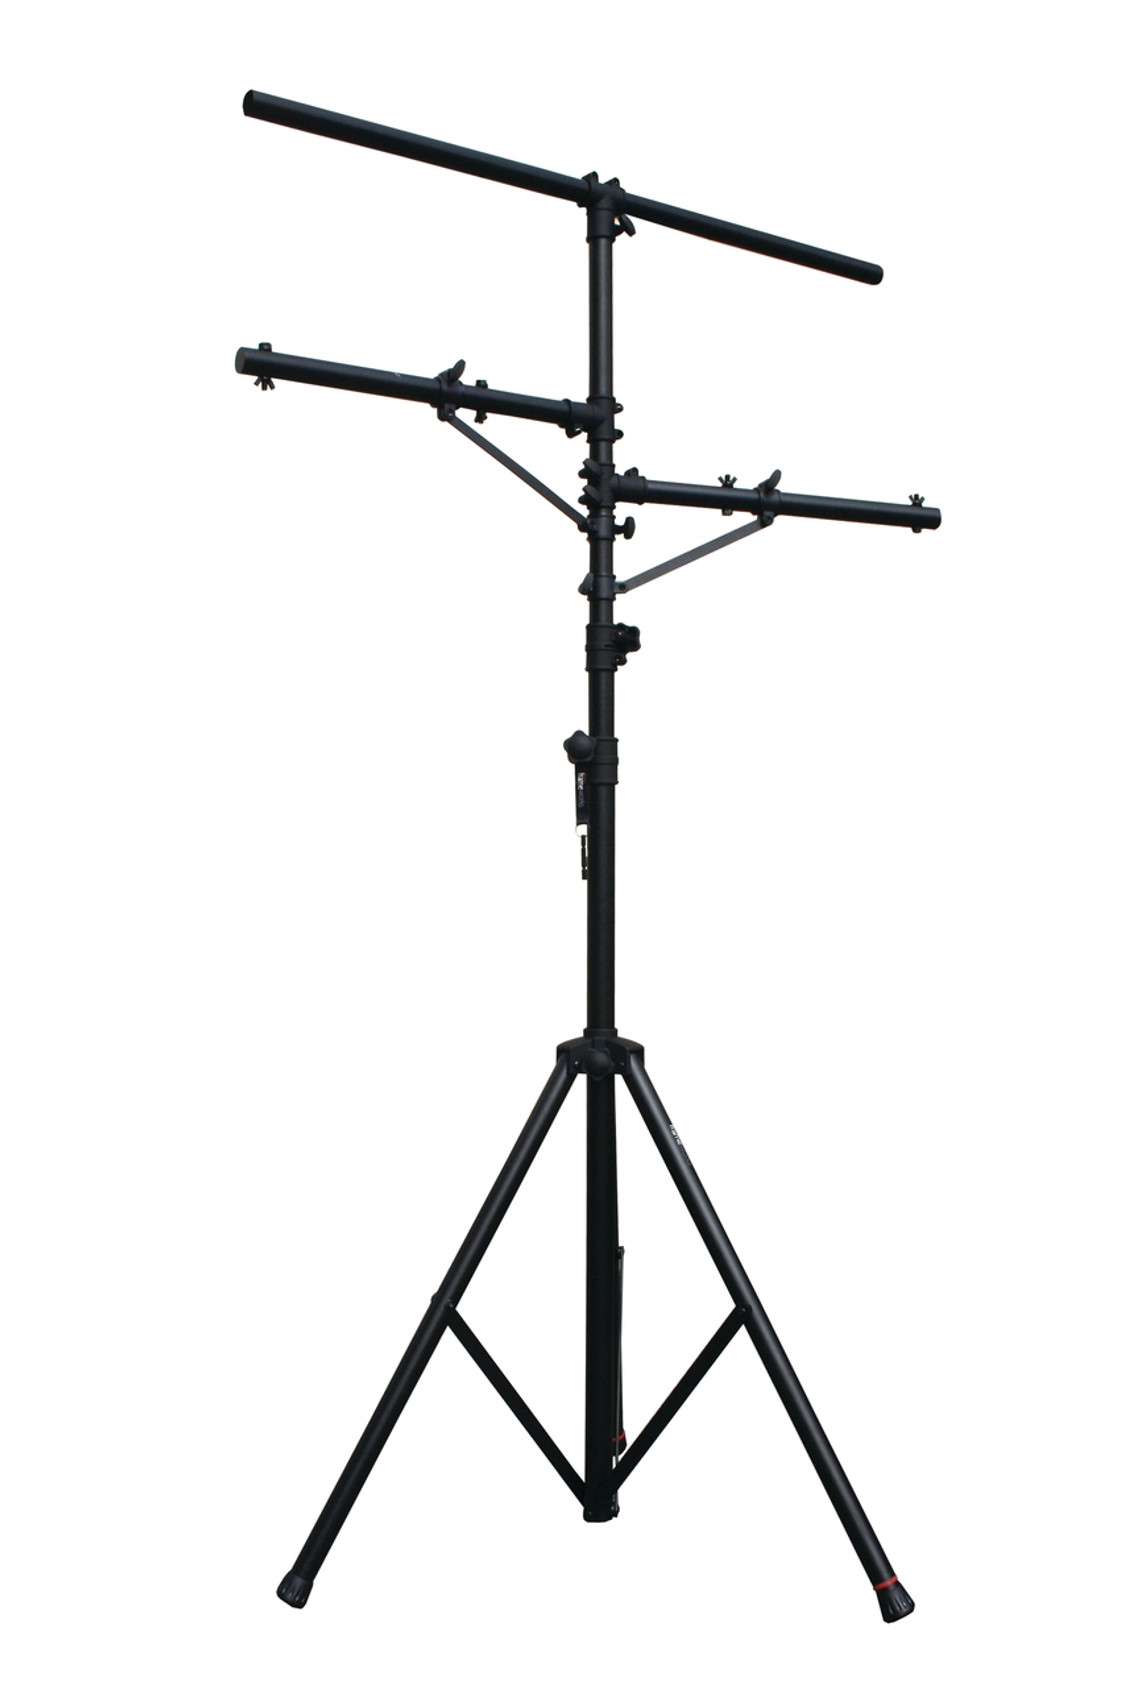 Product image for Frameworks Lightweight Aluminum Lighting Stand | Gator Cases |  | My Worship Store